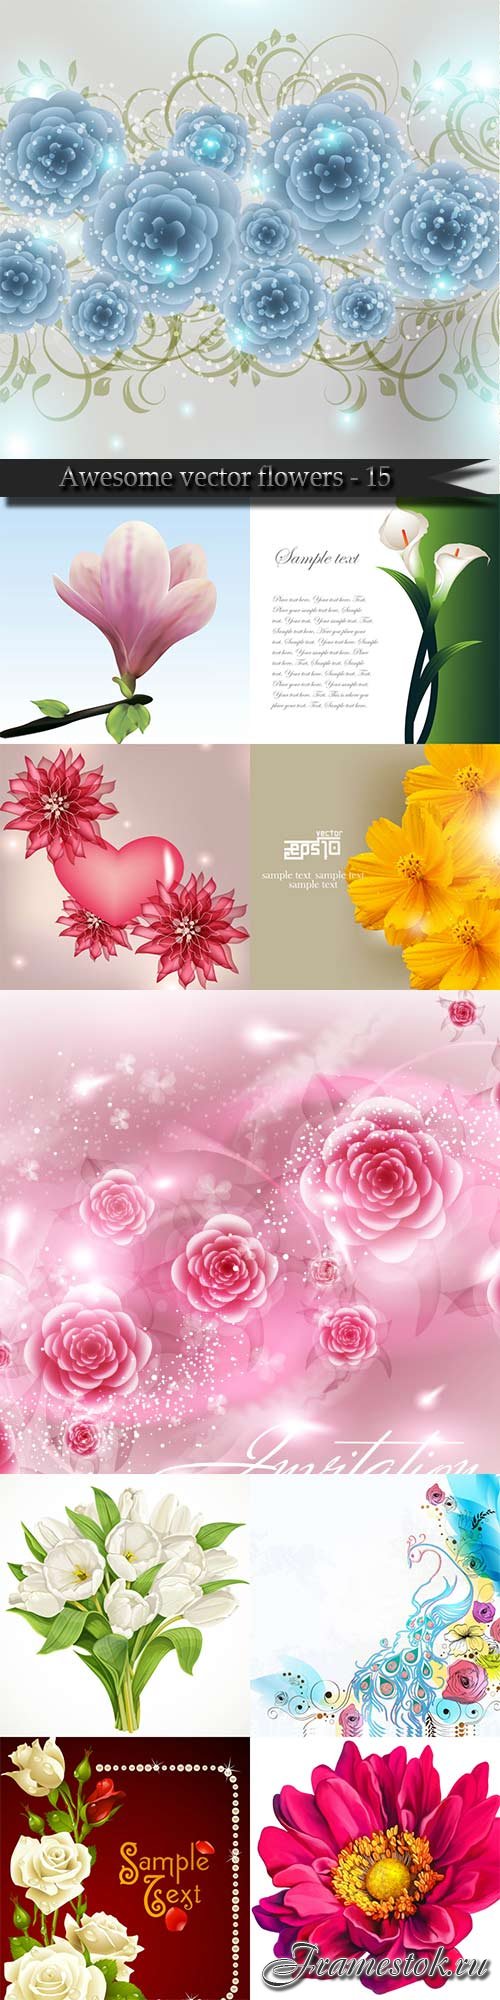 Awesome vector flowers - 15